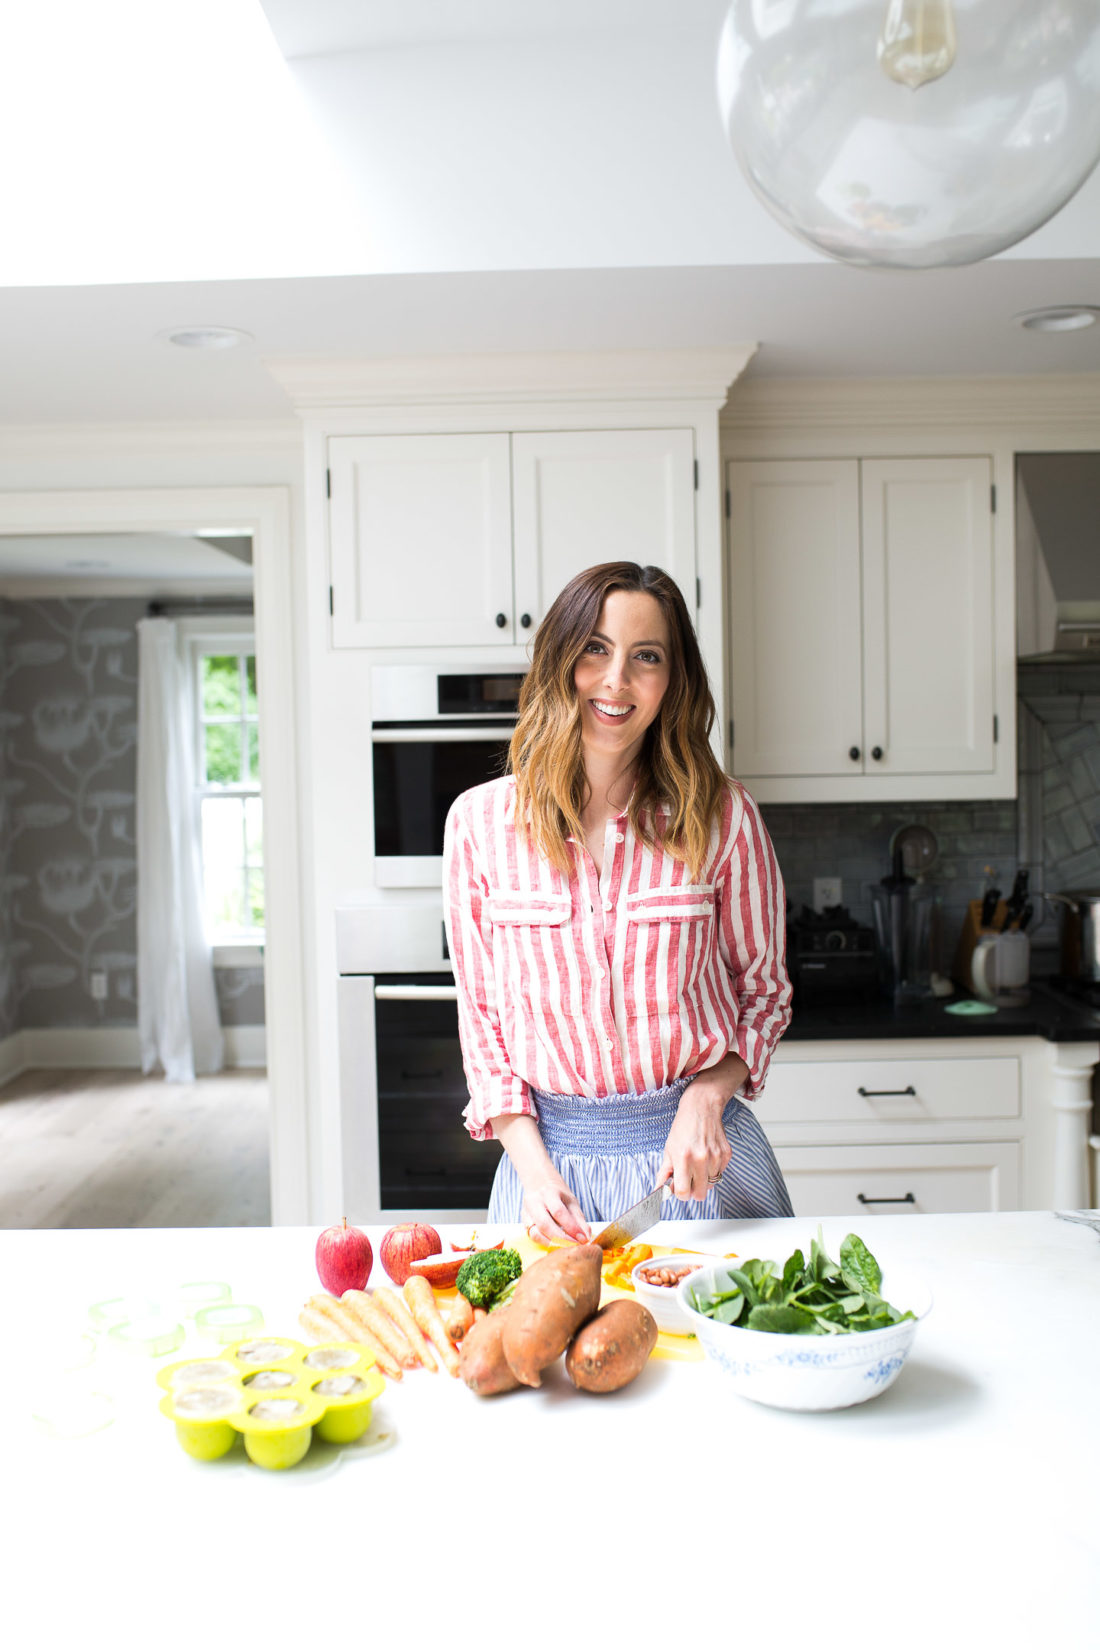 Eva Amurri Martino makes baby food blends in the kitchen of her Connecticut home